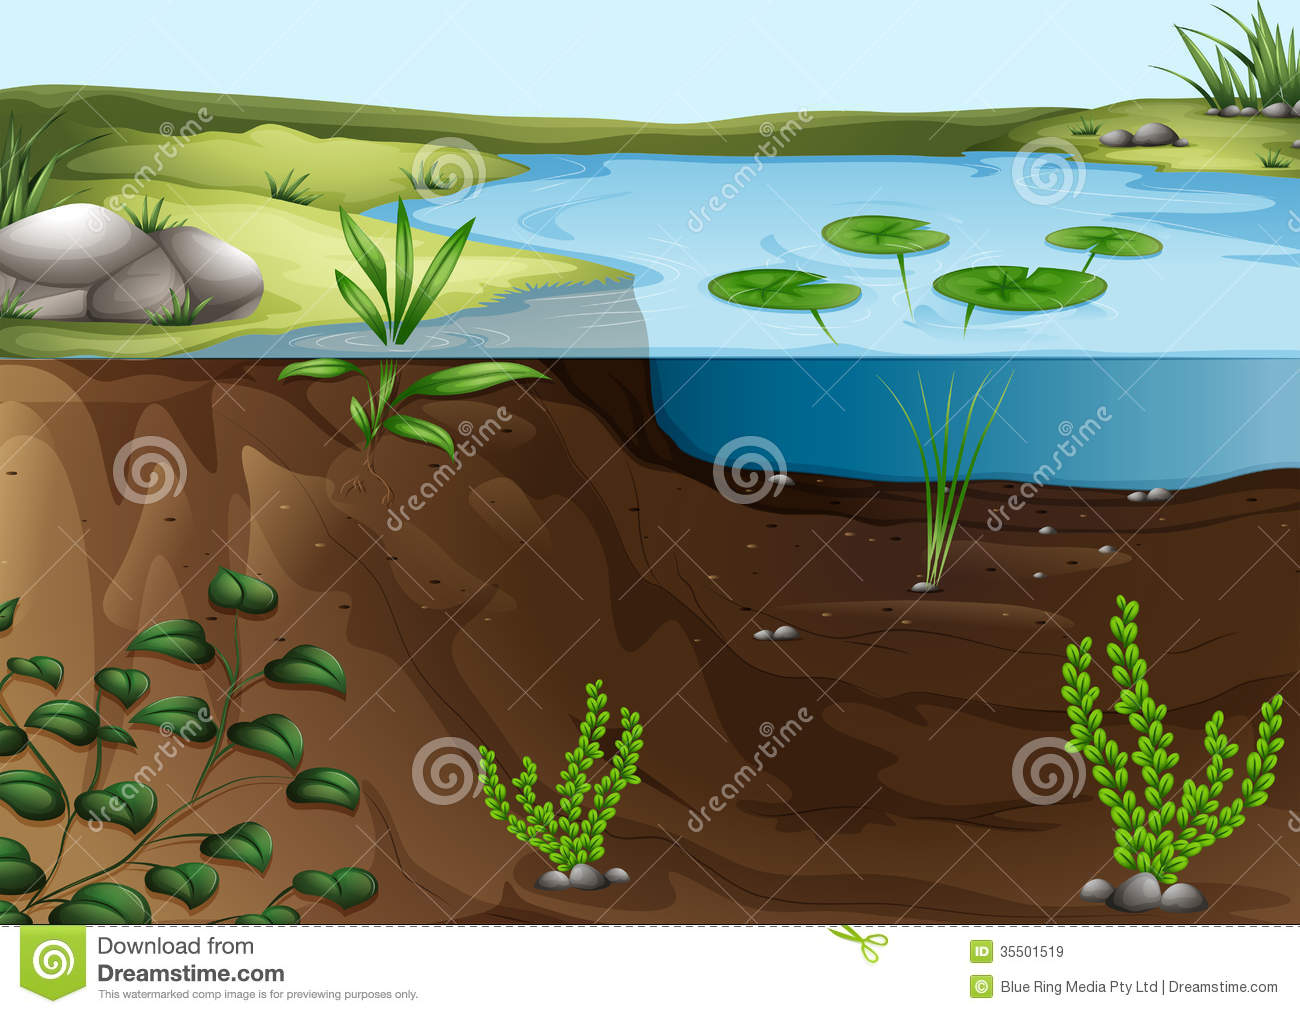 Pond Ecosystem Royalty Free Stock Images   Image  35501519